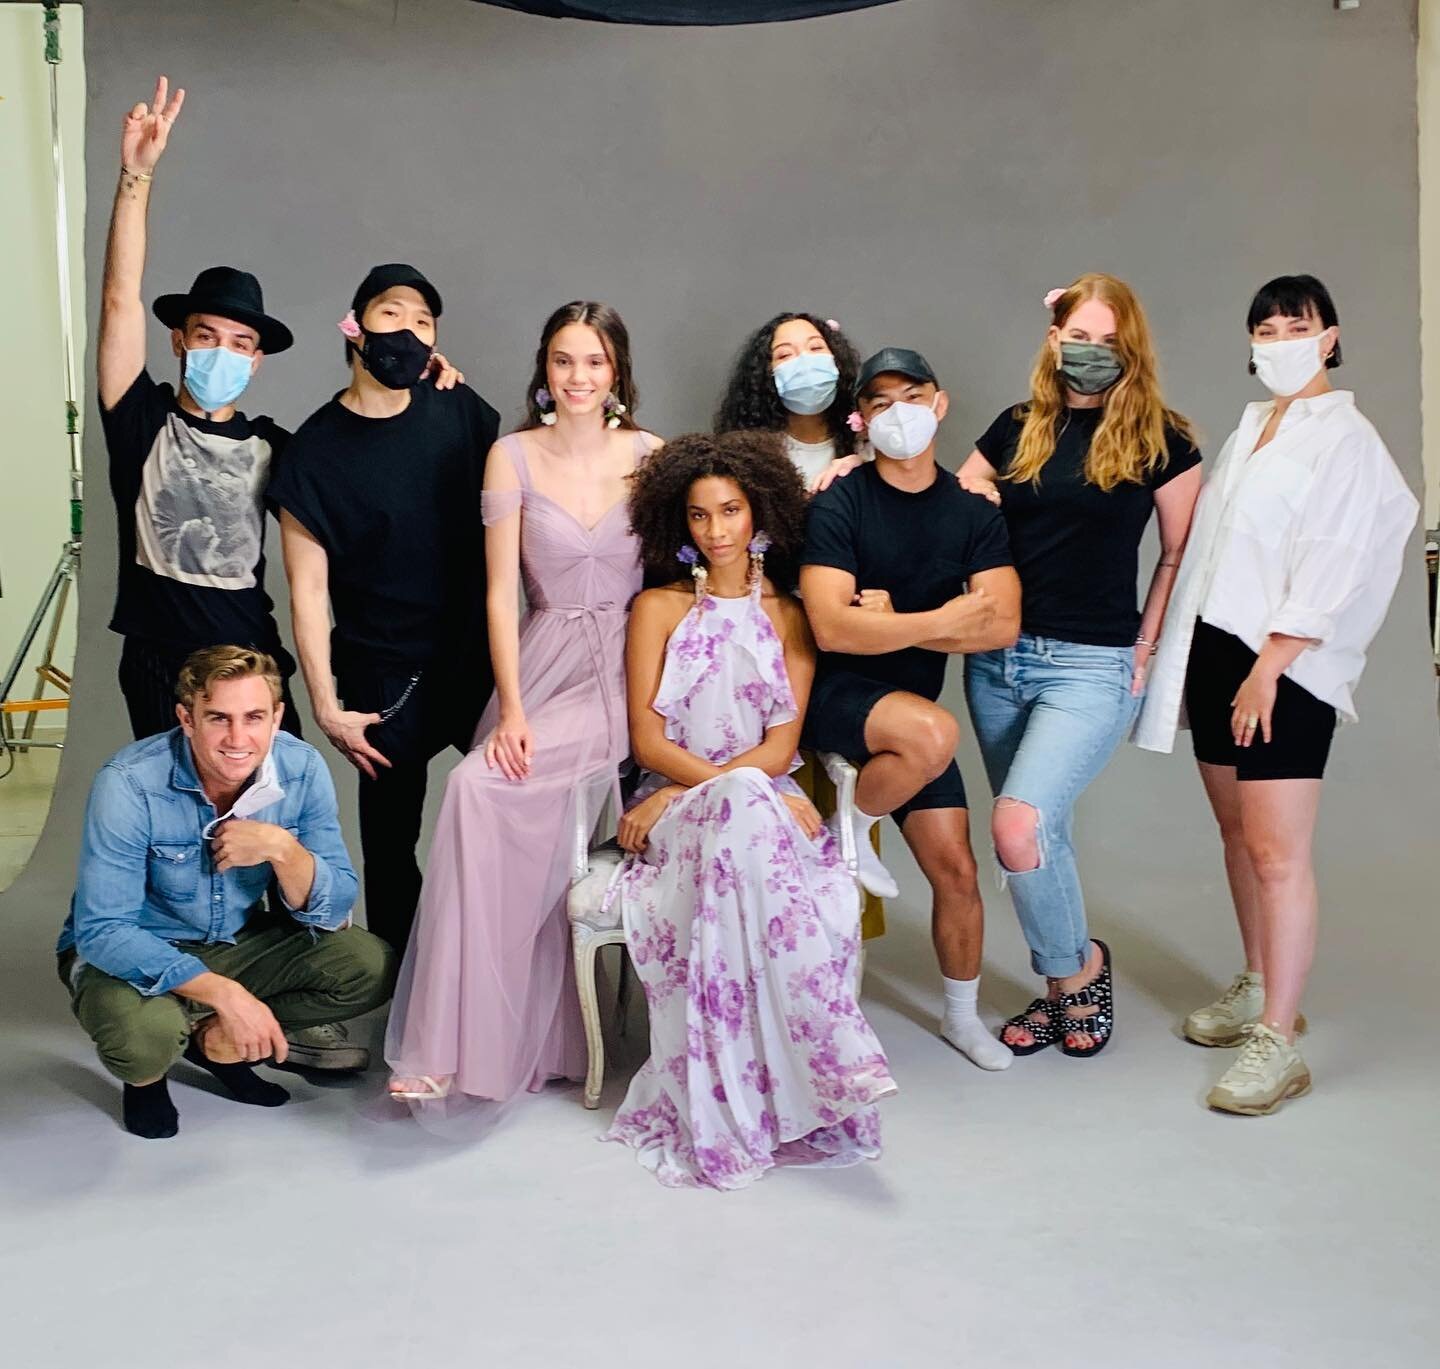 Revealing @Marchesa and their fierce crew. Believe me everyone is 😃 under the masks. @mihcacho @misswaynesworld 

Behind the scenes of the @Marchesa 2020 Bridesmaids shoot. Stay strong and excited for all your weddings ladies, this too shall pass!

